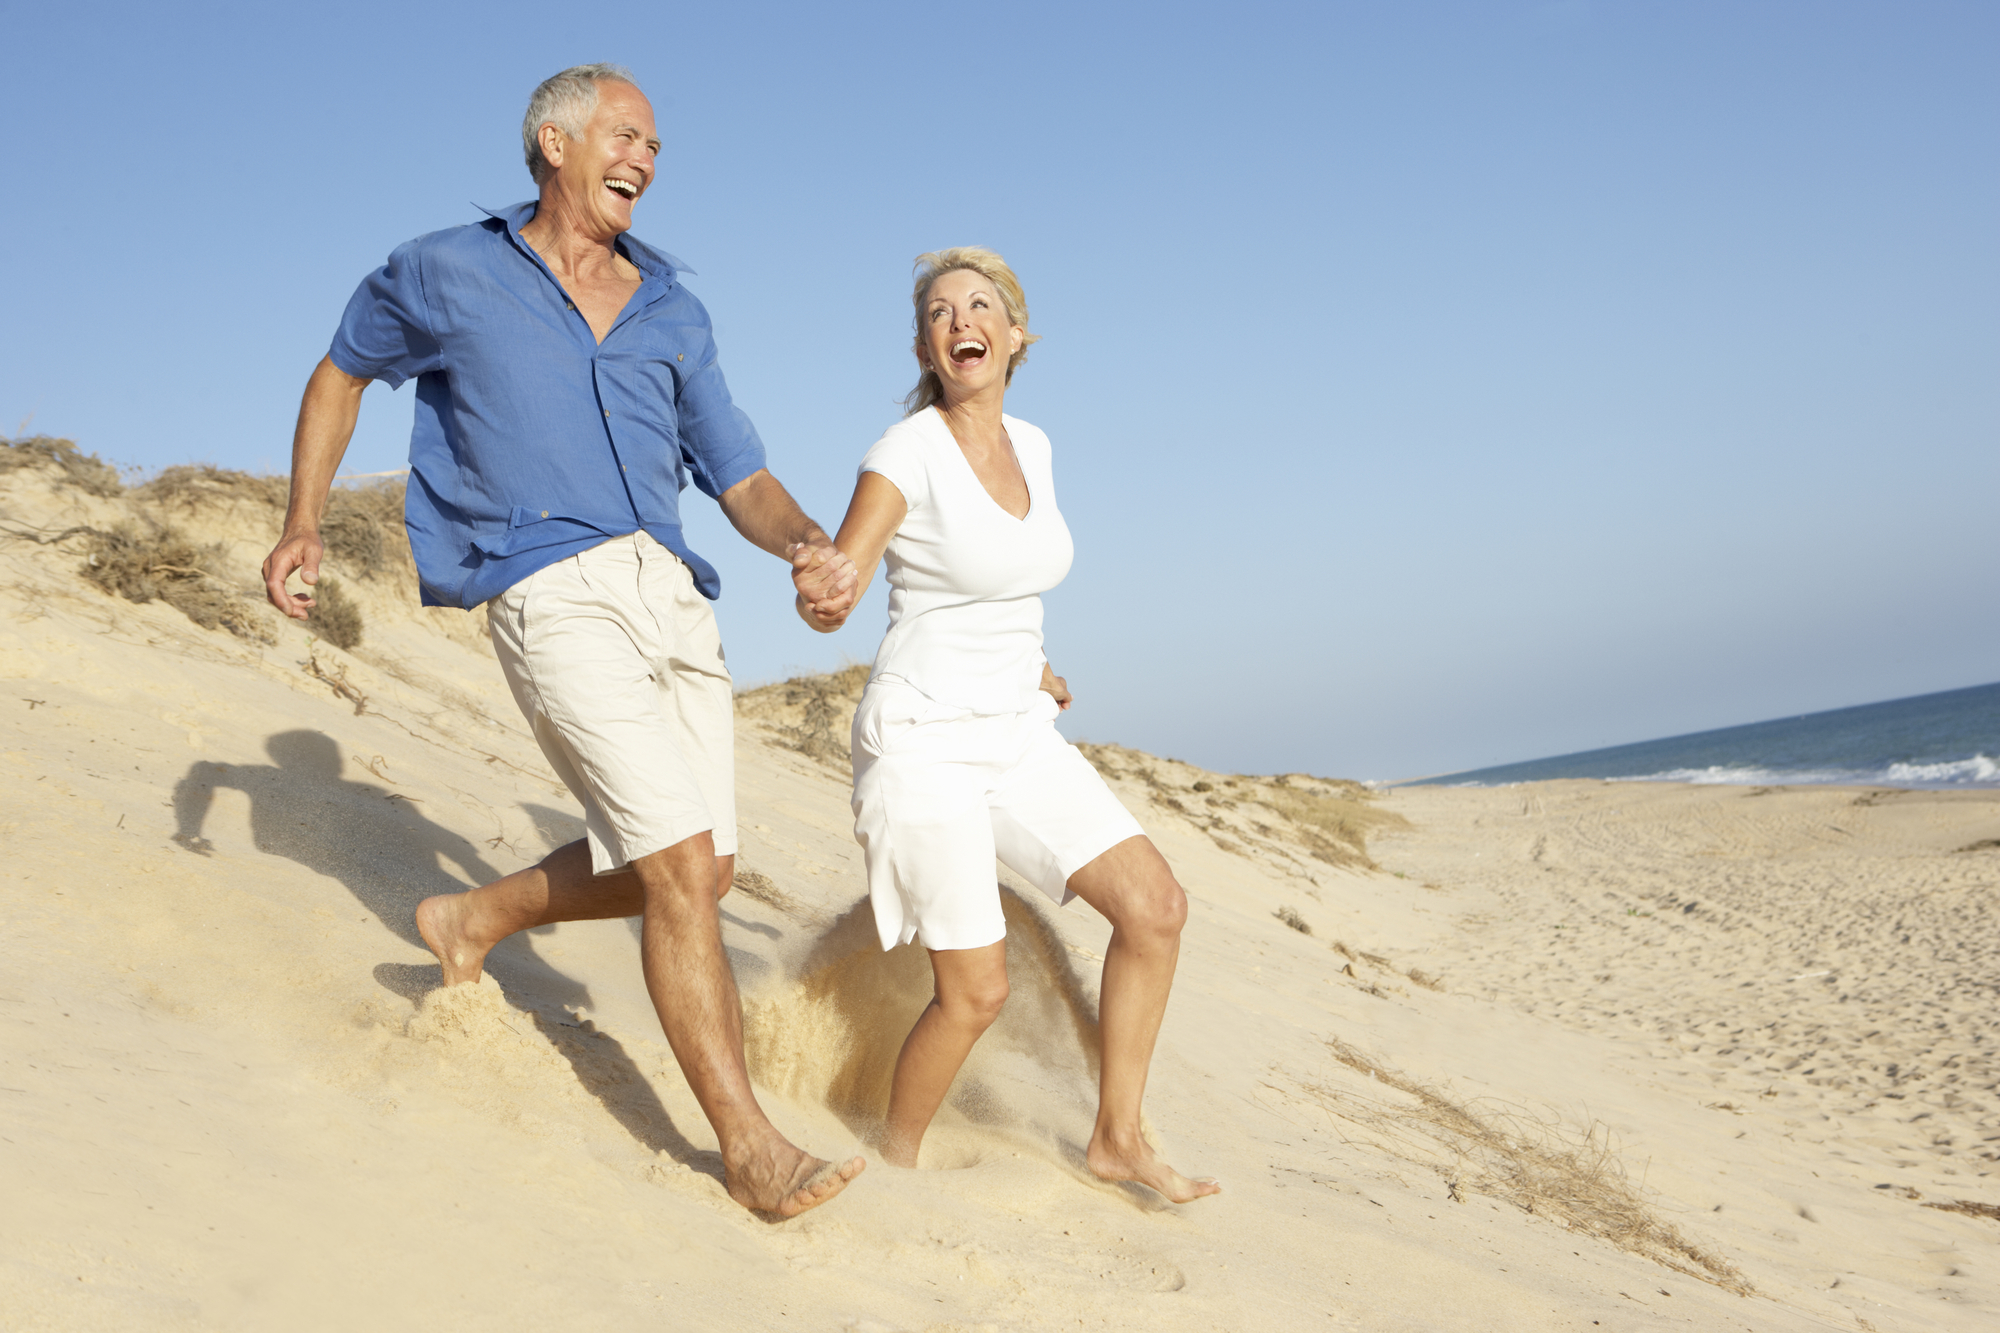 Old couple running on the sand. Want to stay active when you are old? Keys to aging with grace.